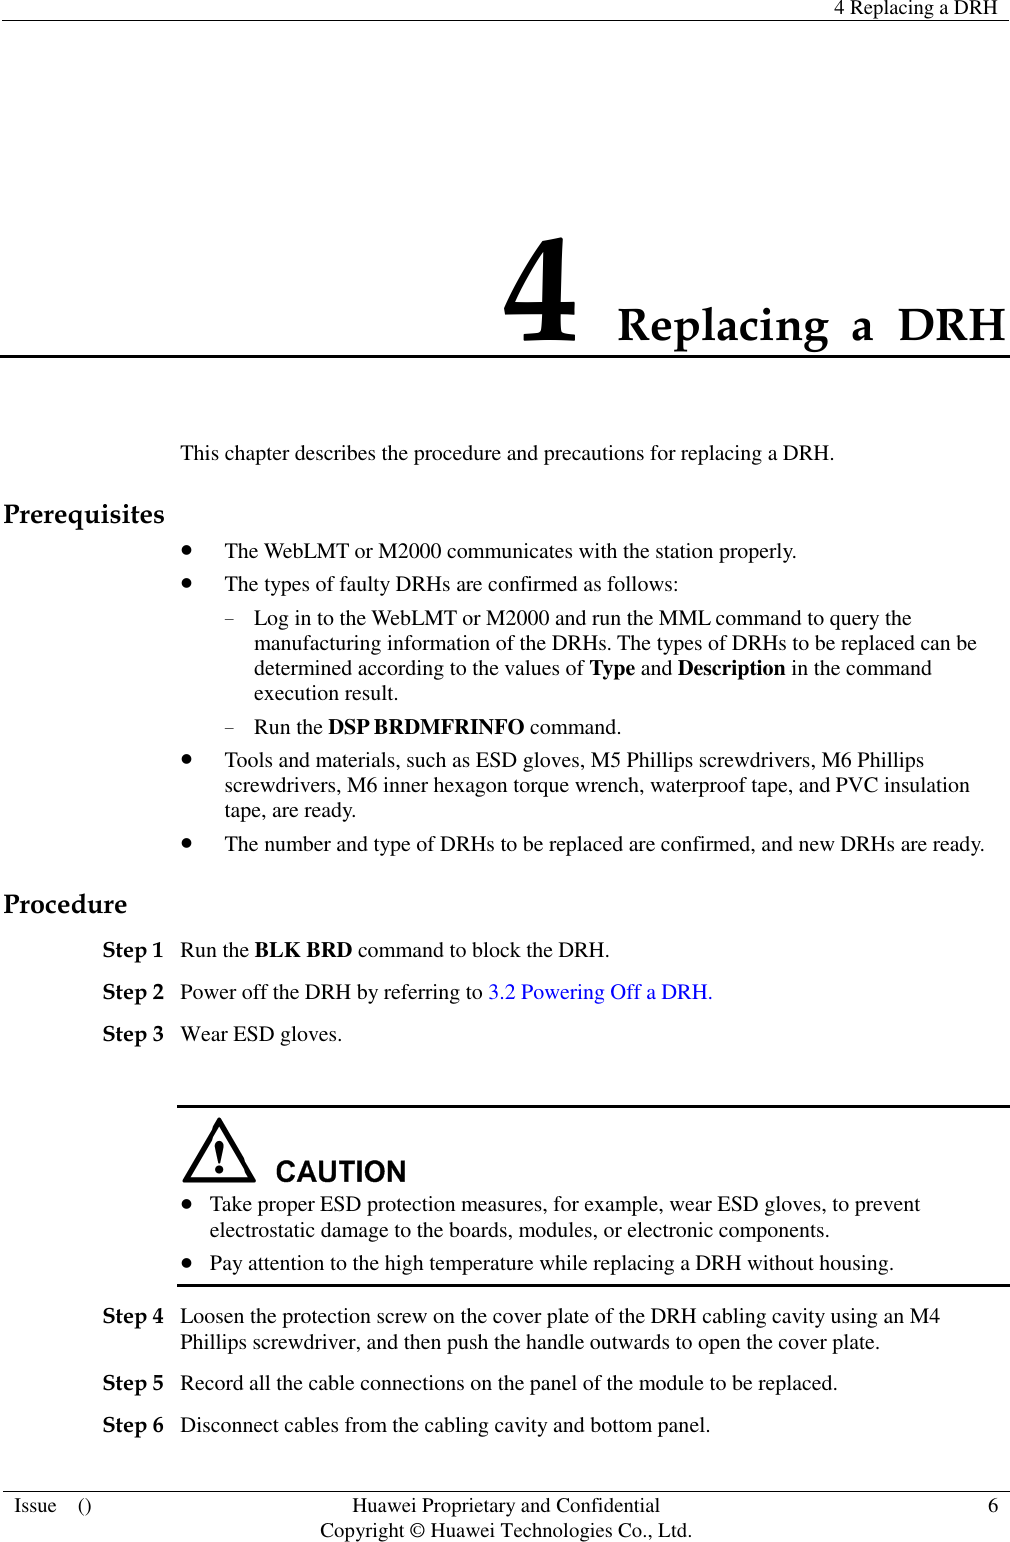   4 Replacing a DRH  Issue    () Huawei Proprietary and Confidential                                     Copyright © Huawei Technologies Co., Ltd. 6  4 Replacing  a  DRH This chapter describes the procedure and precautions for replacing a DRH. Prerequisites  The WebLMT or M2000 communicates with the station properly.  The types of faulty DRHs are confirmed as follows: − Log in to the WebLMT or M2000 and run the MML command to query the manufacturing information of the DRHs. The types of DRHs to be replaced can be determined according to the values of Type and Description in the command execution result. − Run the DSP BRDMFRINFO command.    Tools and materials, such as ESD gloves, M5 Phillips screwdrivers, M6 Phillips screwdrivers, M6 inner hexagon torque wrench, waterproof tape, and PVC insulation tape, are ready.  The number and type of DRHs to be replaced are confirmed, and new DRHs are ready. Procedure Step 1 Run the BLK BRD command to block the DRH. Step 2 Power off the DRH by referring to 3.2 Powering Off a DRH.   Step 3 Wear ESD gloves.    Take proper ESD protection measures, for example, wear ESD gloves, to prevent electrostatic damage to the boards, modules, or electronic components.  Pay attention to the high temperature while replacing a DRH without housing. Step 4 Loosen the protection screw on the cover plate of the DRH cabling cavity using an M4 Phillips screwdriver, and then push the handle outwards to open the cover plate. Step 5 Record all the cable connections on the panel of the module to be replaced.   Step 6 Disconnect cables from the cabling cavity and bottom panel. 